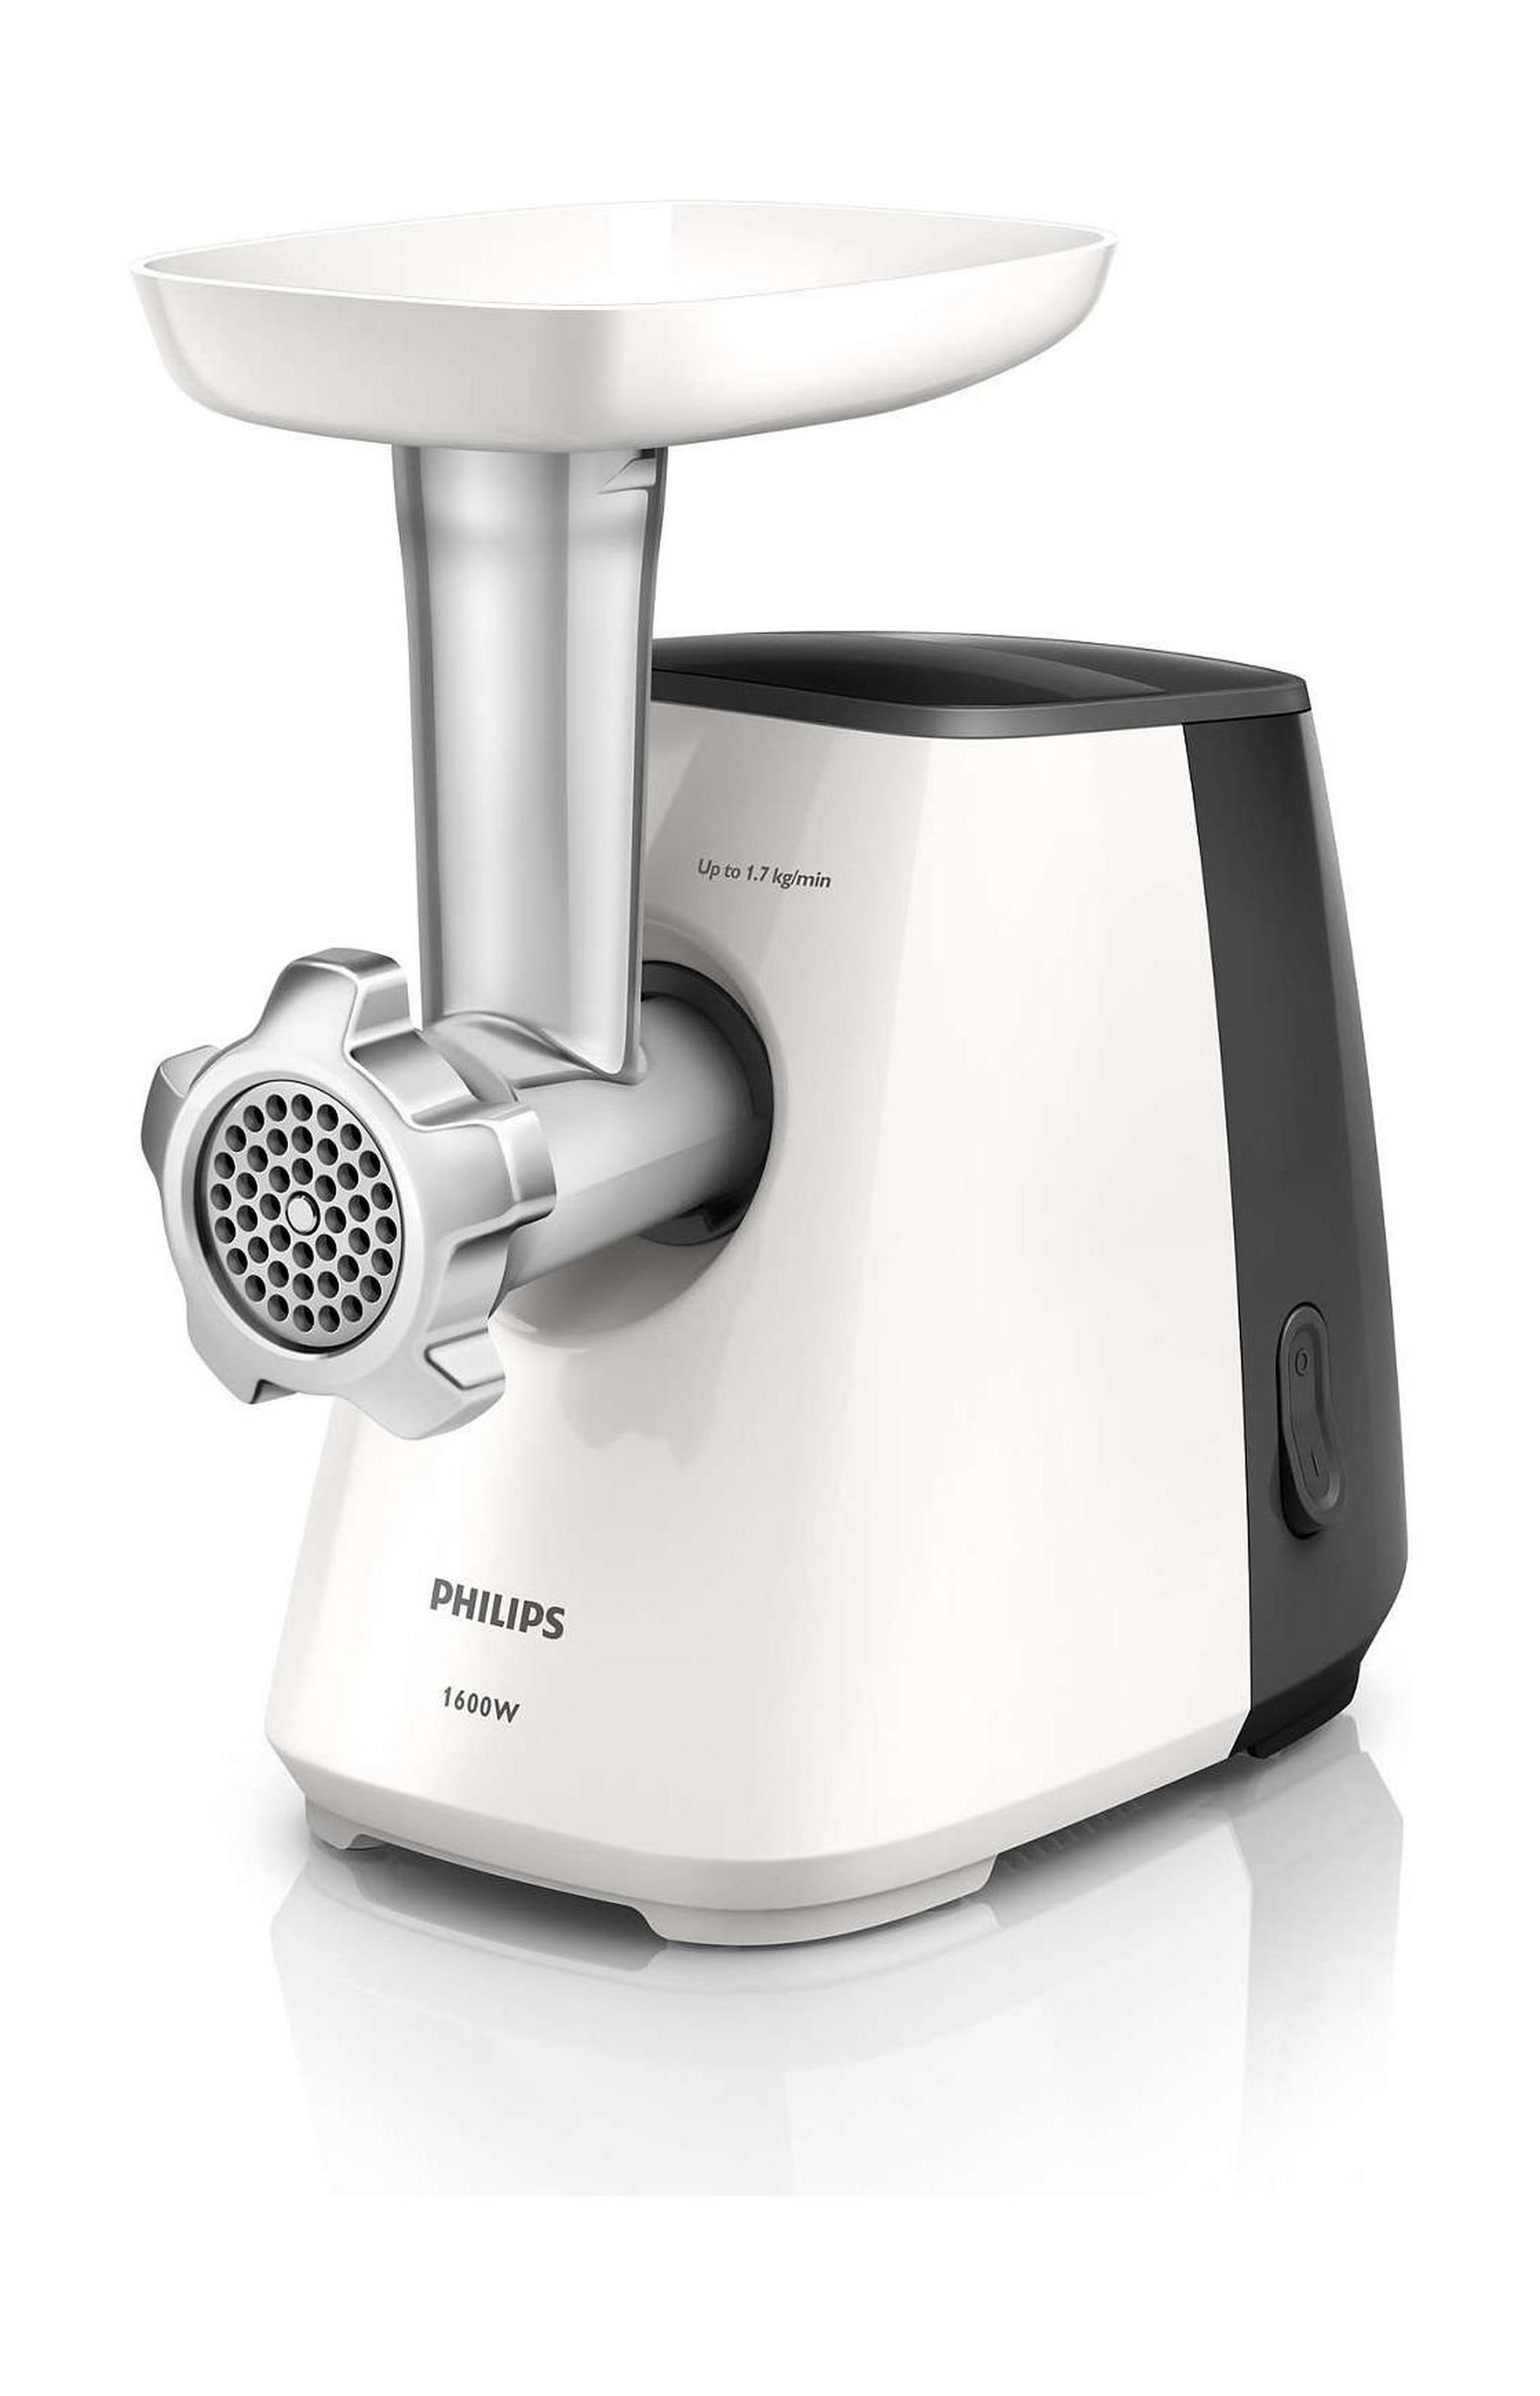 Philips 1600W 1.7kg/min Daily Collection Meat Mincer (HR2713/31)